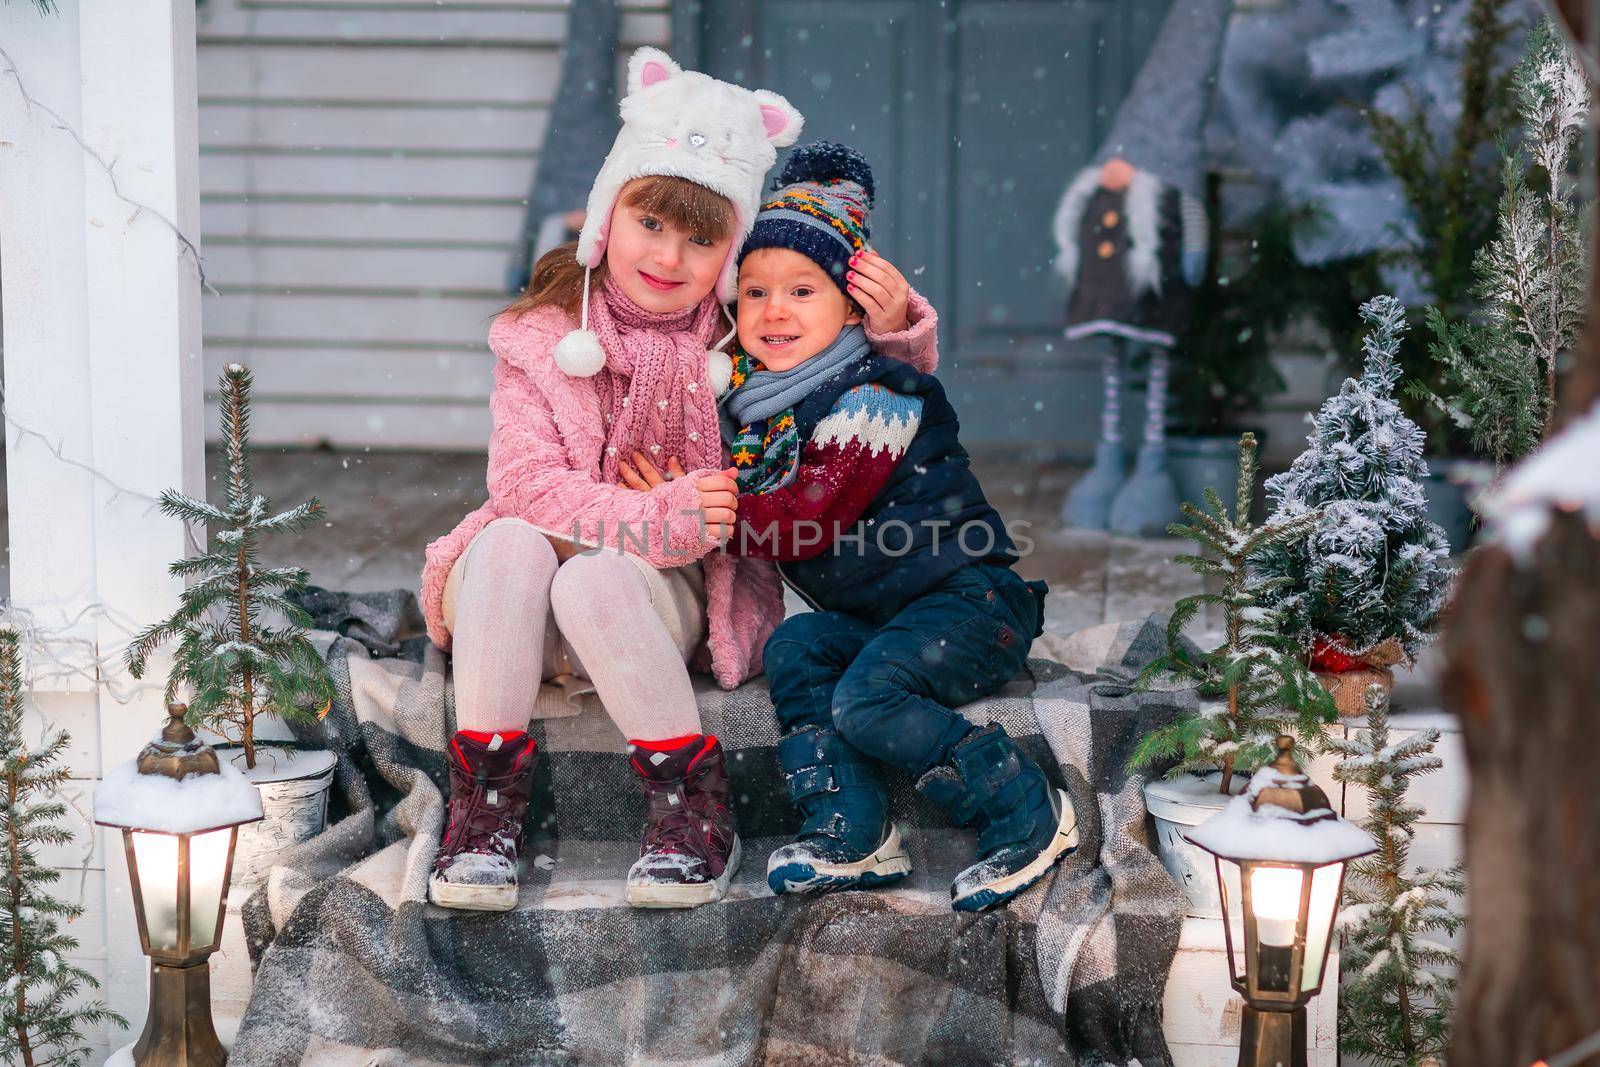 Happy little kids sitting on the porch of the Christmas decorated house, snowing outdoor. Happy New Year and Merry Christmas. Magic winter